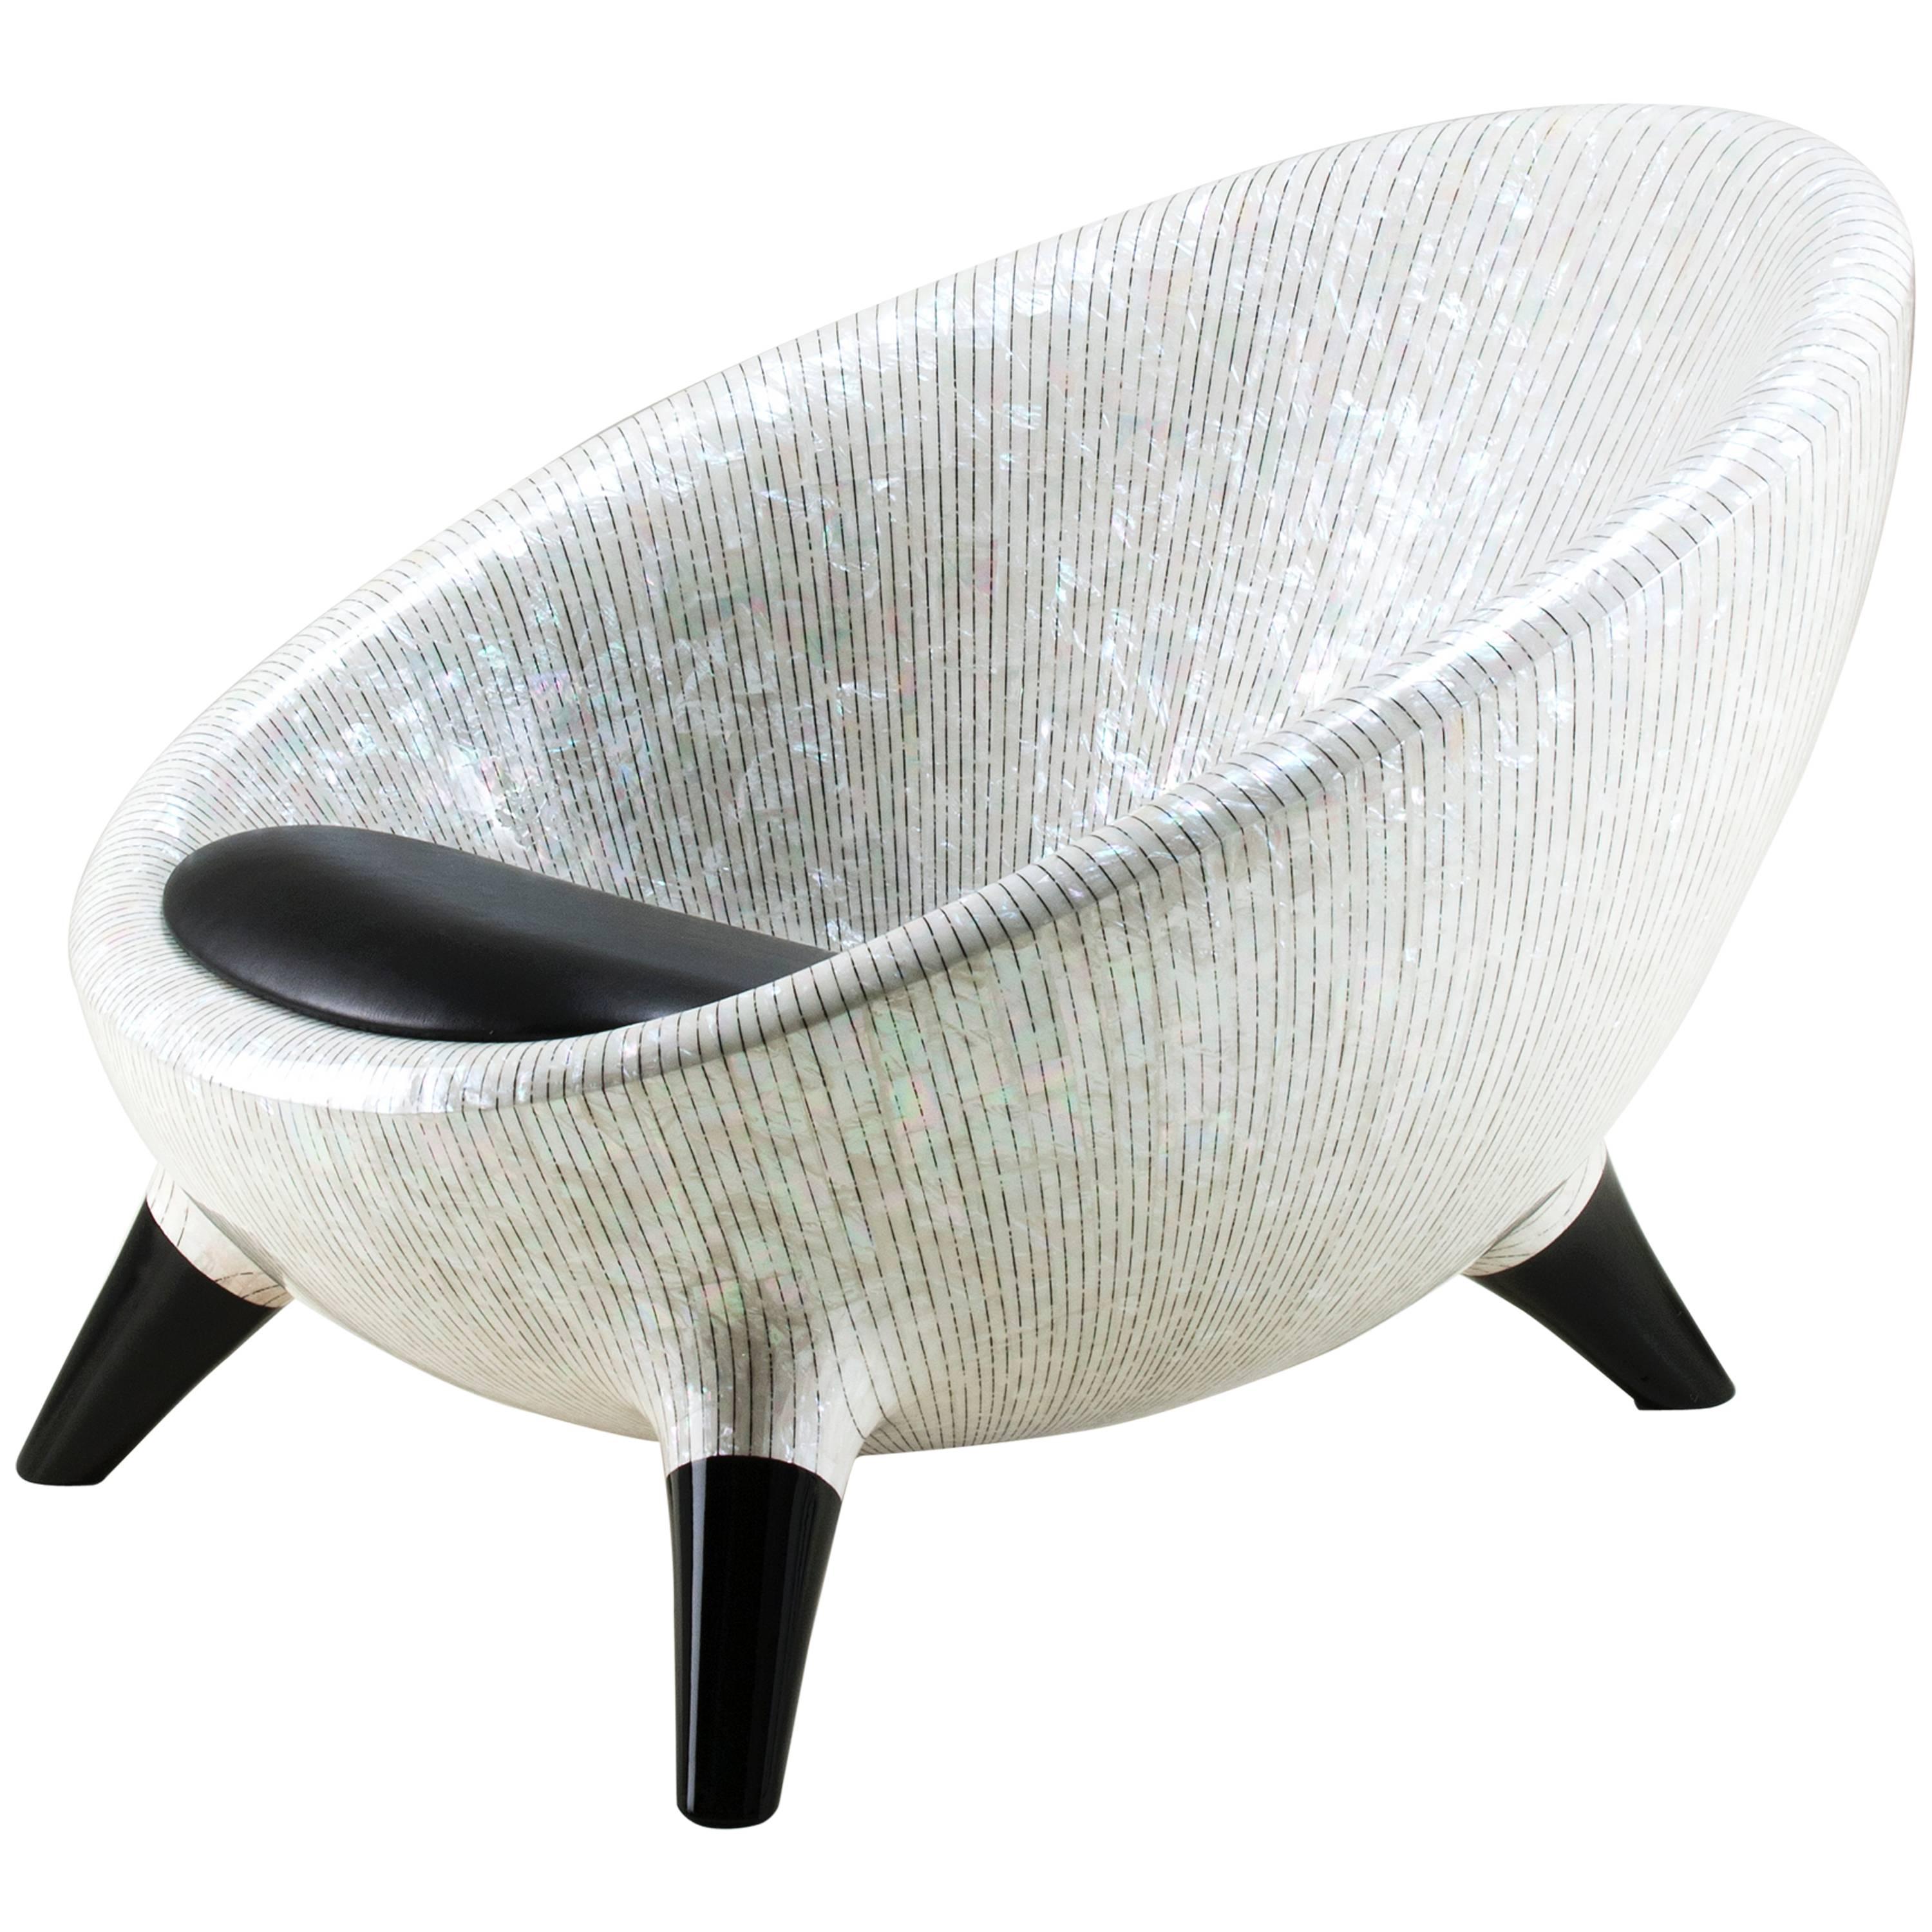 Mother-of-Pearl Chair by Kang Myung Sun, 2014 For Sale